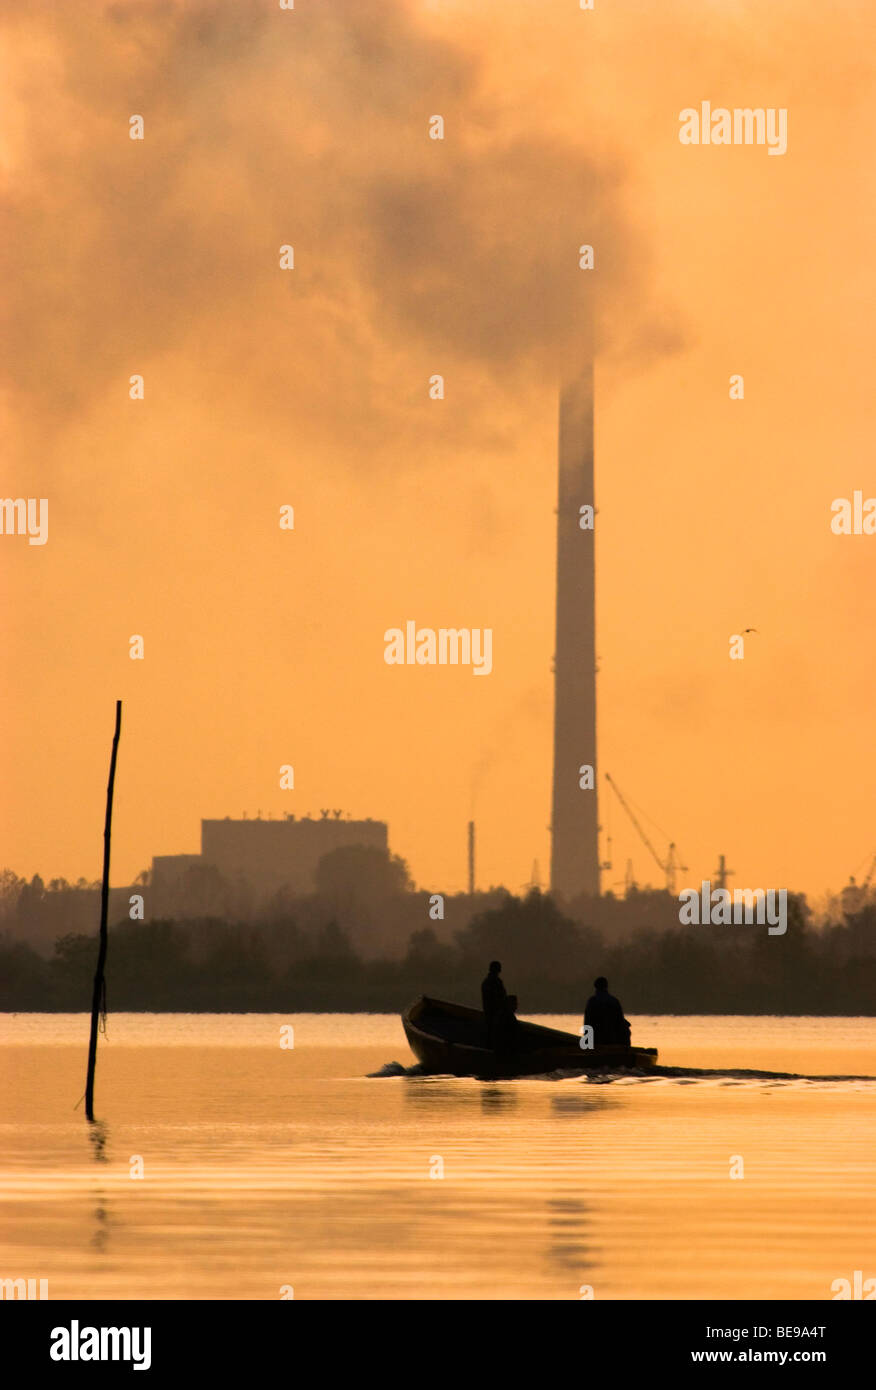 small scale fishing in the oderdelta with heavy industry on the shoreline Stock Photo